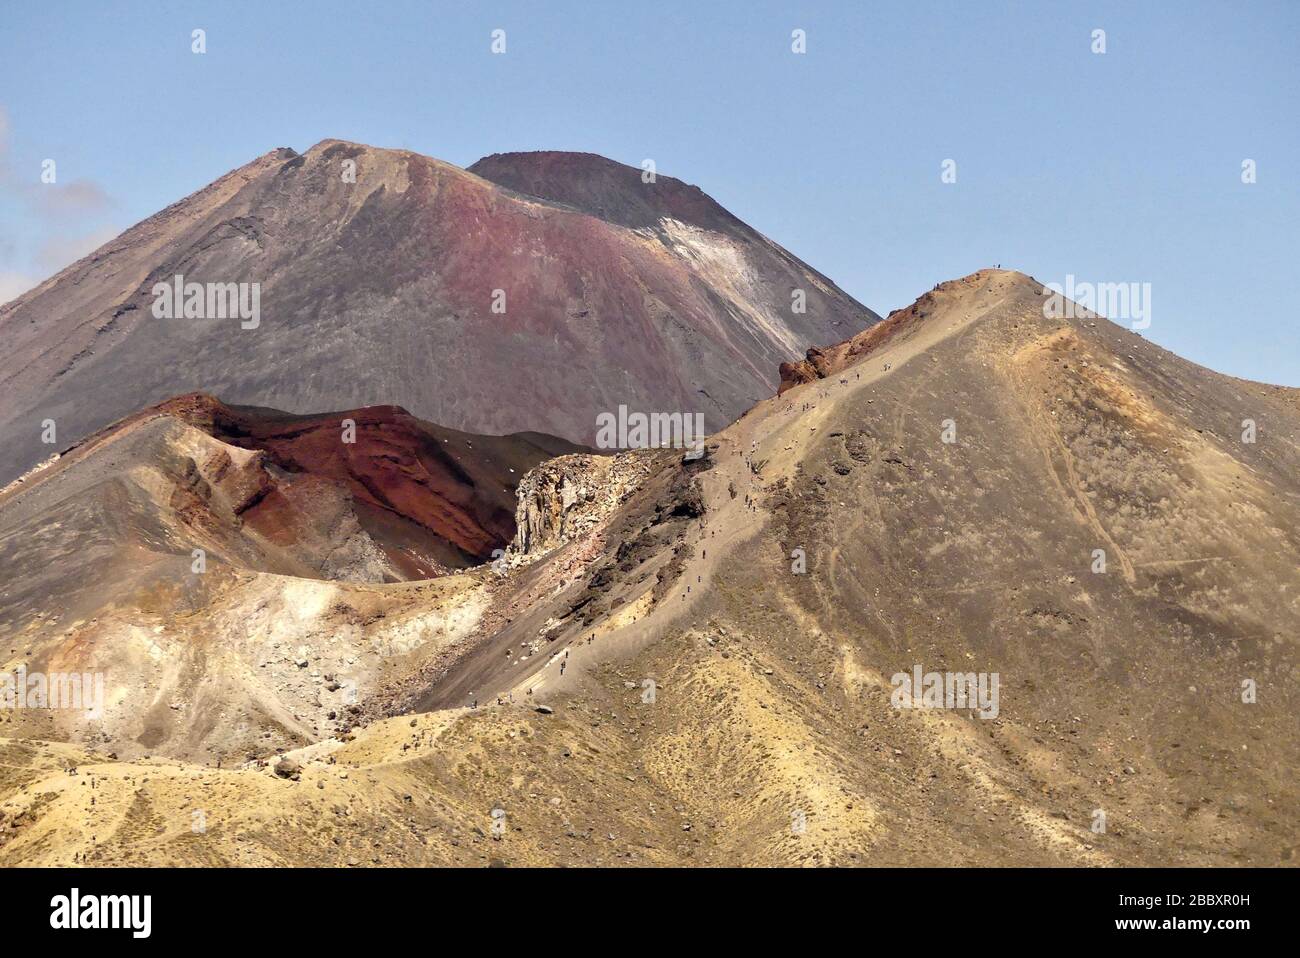 Mount Ngauruhoe and the Red Crater on the Tongariro Crossing, New Zealand Stock Photo